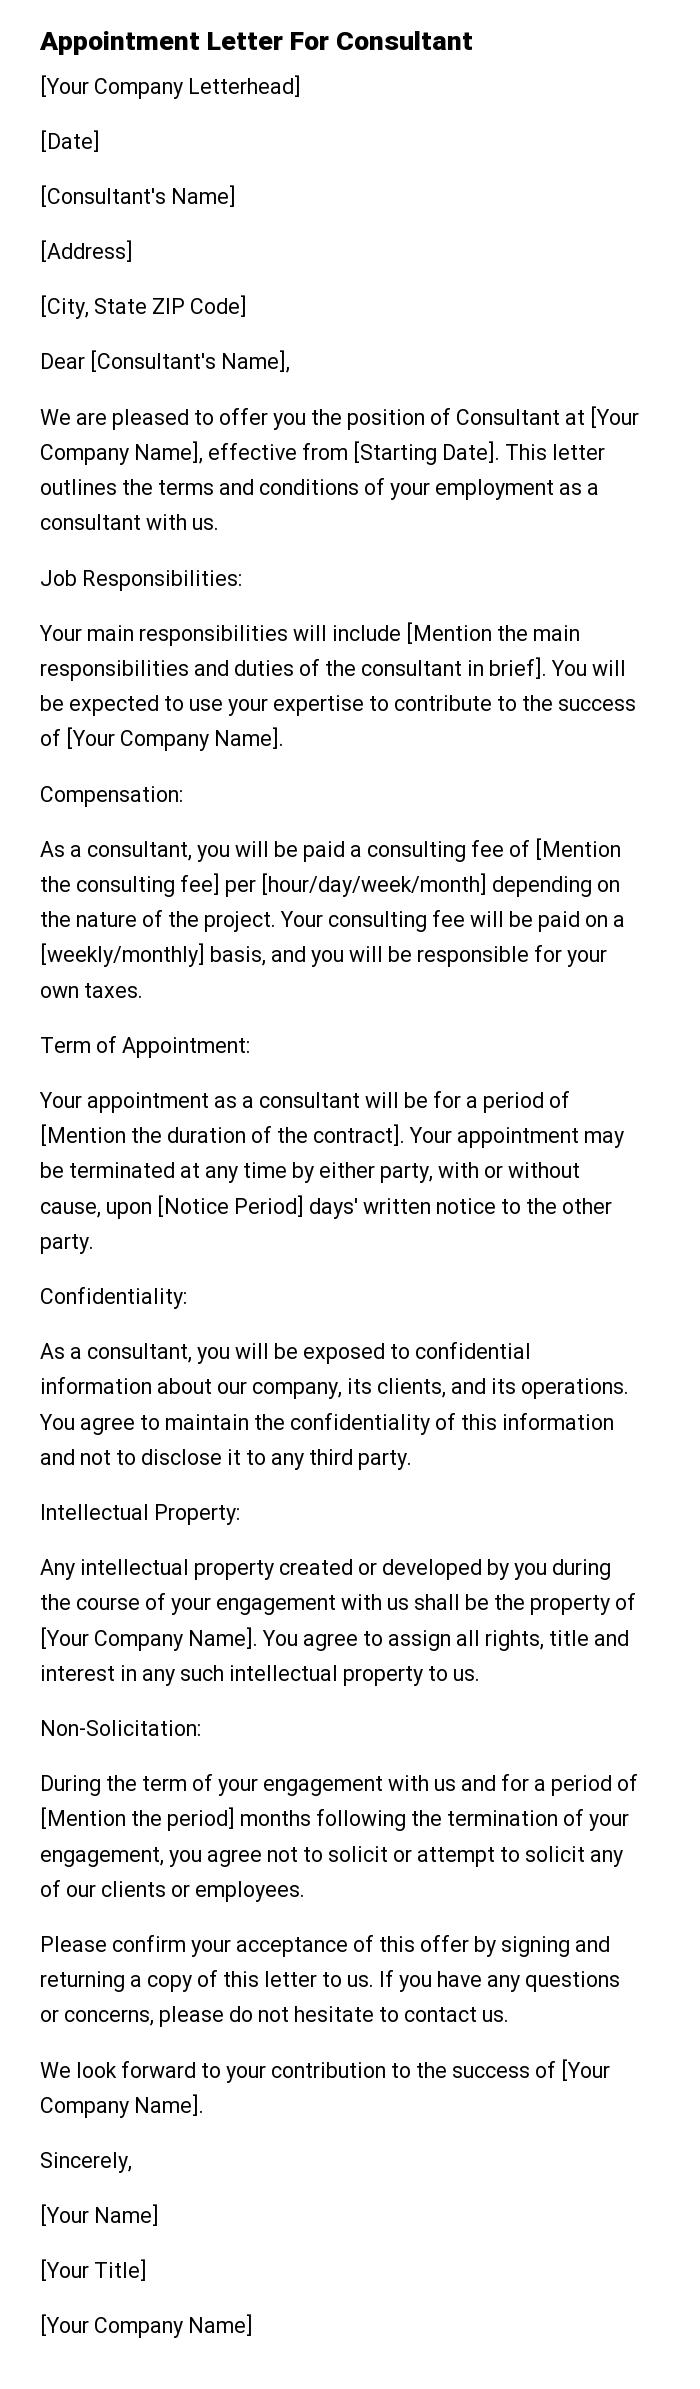 Appointment Letter For Consultant